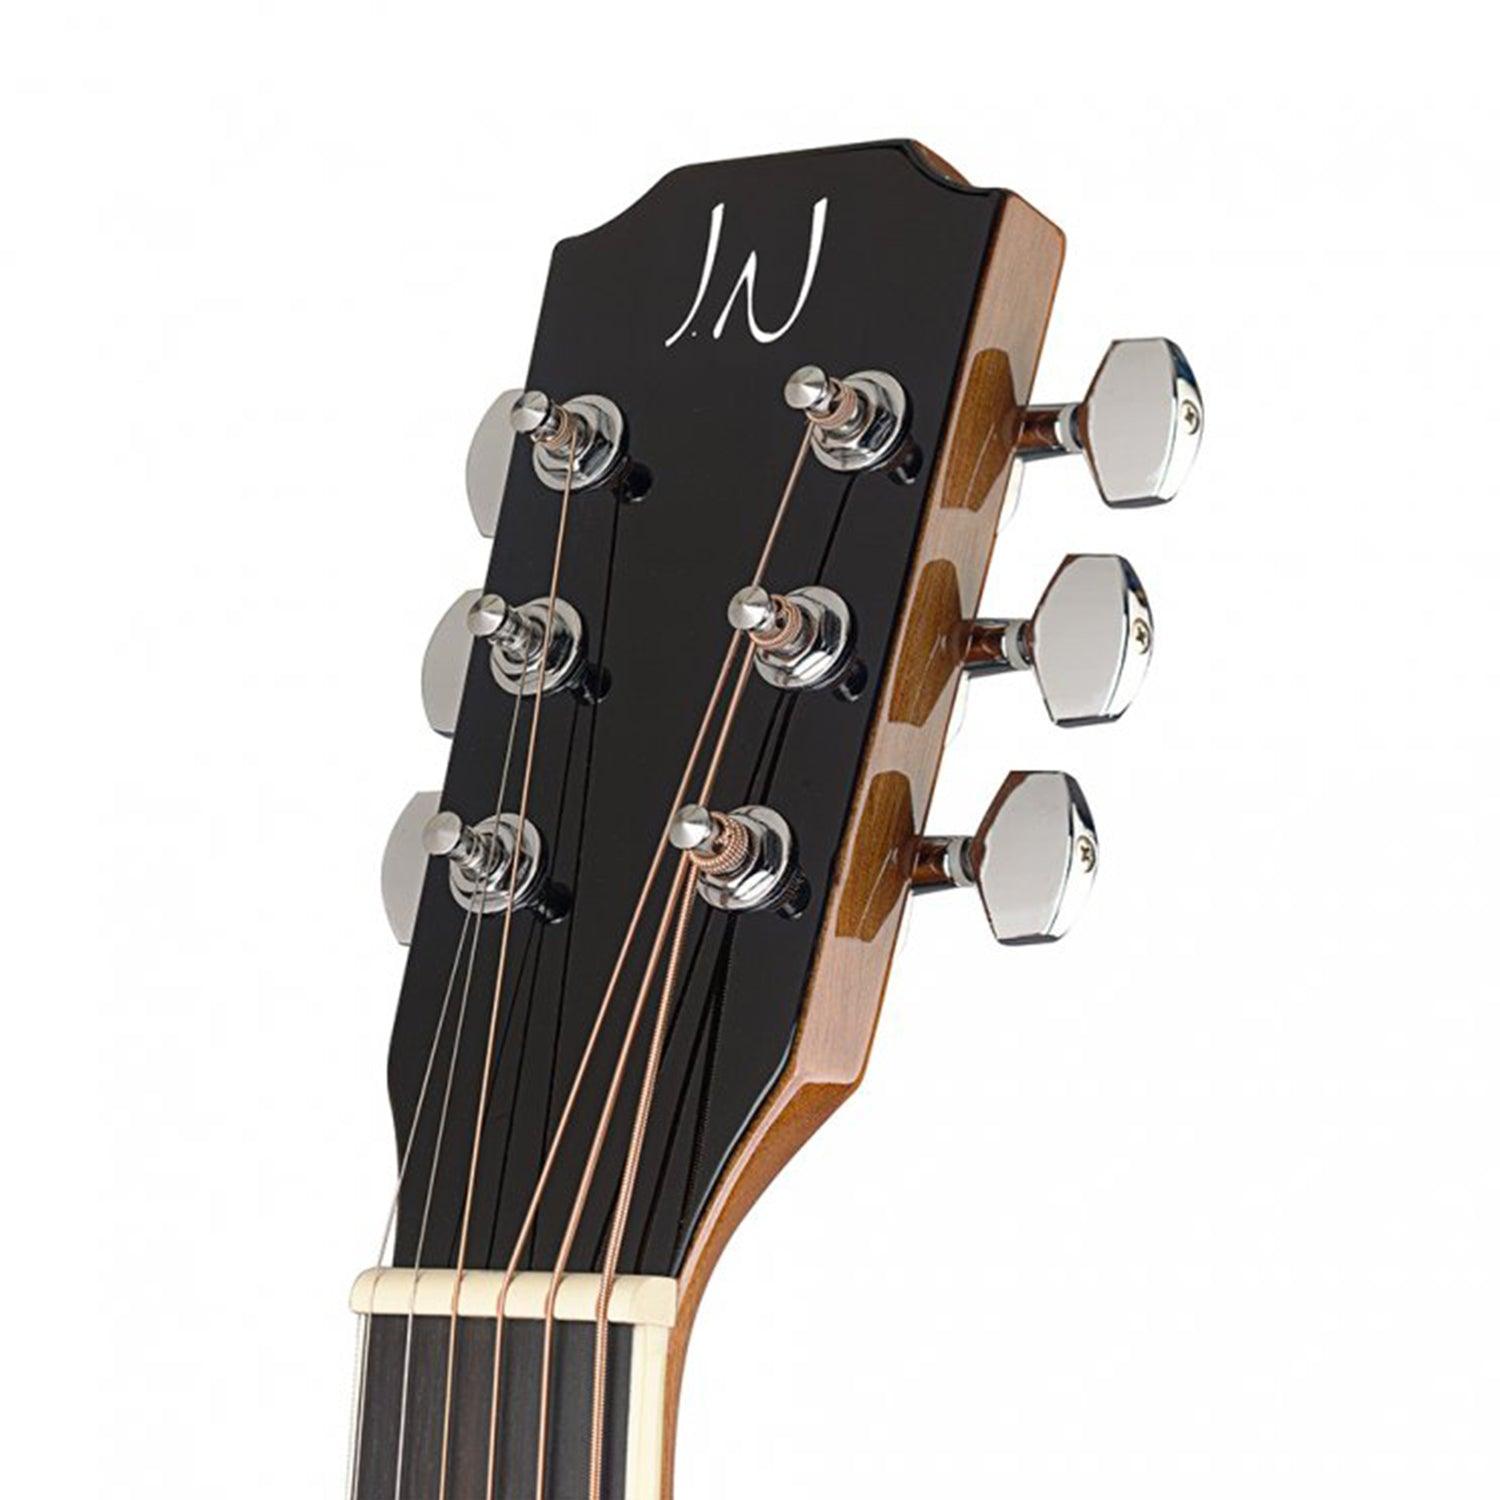 J.N Guitars BES-A DCB LH Dark Cherryburst Acoustic Auditorium Guitar with Solid Spruce Top, left-handed, Bessie series - DY Pro Audio